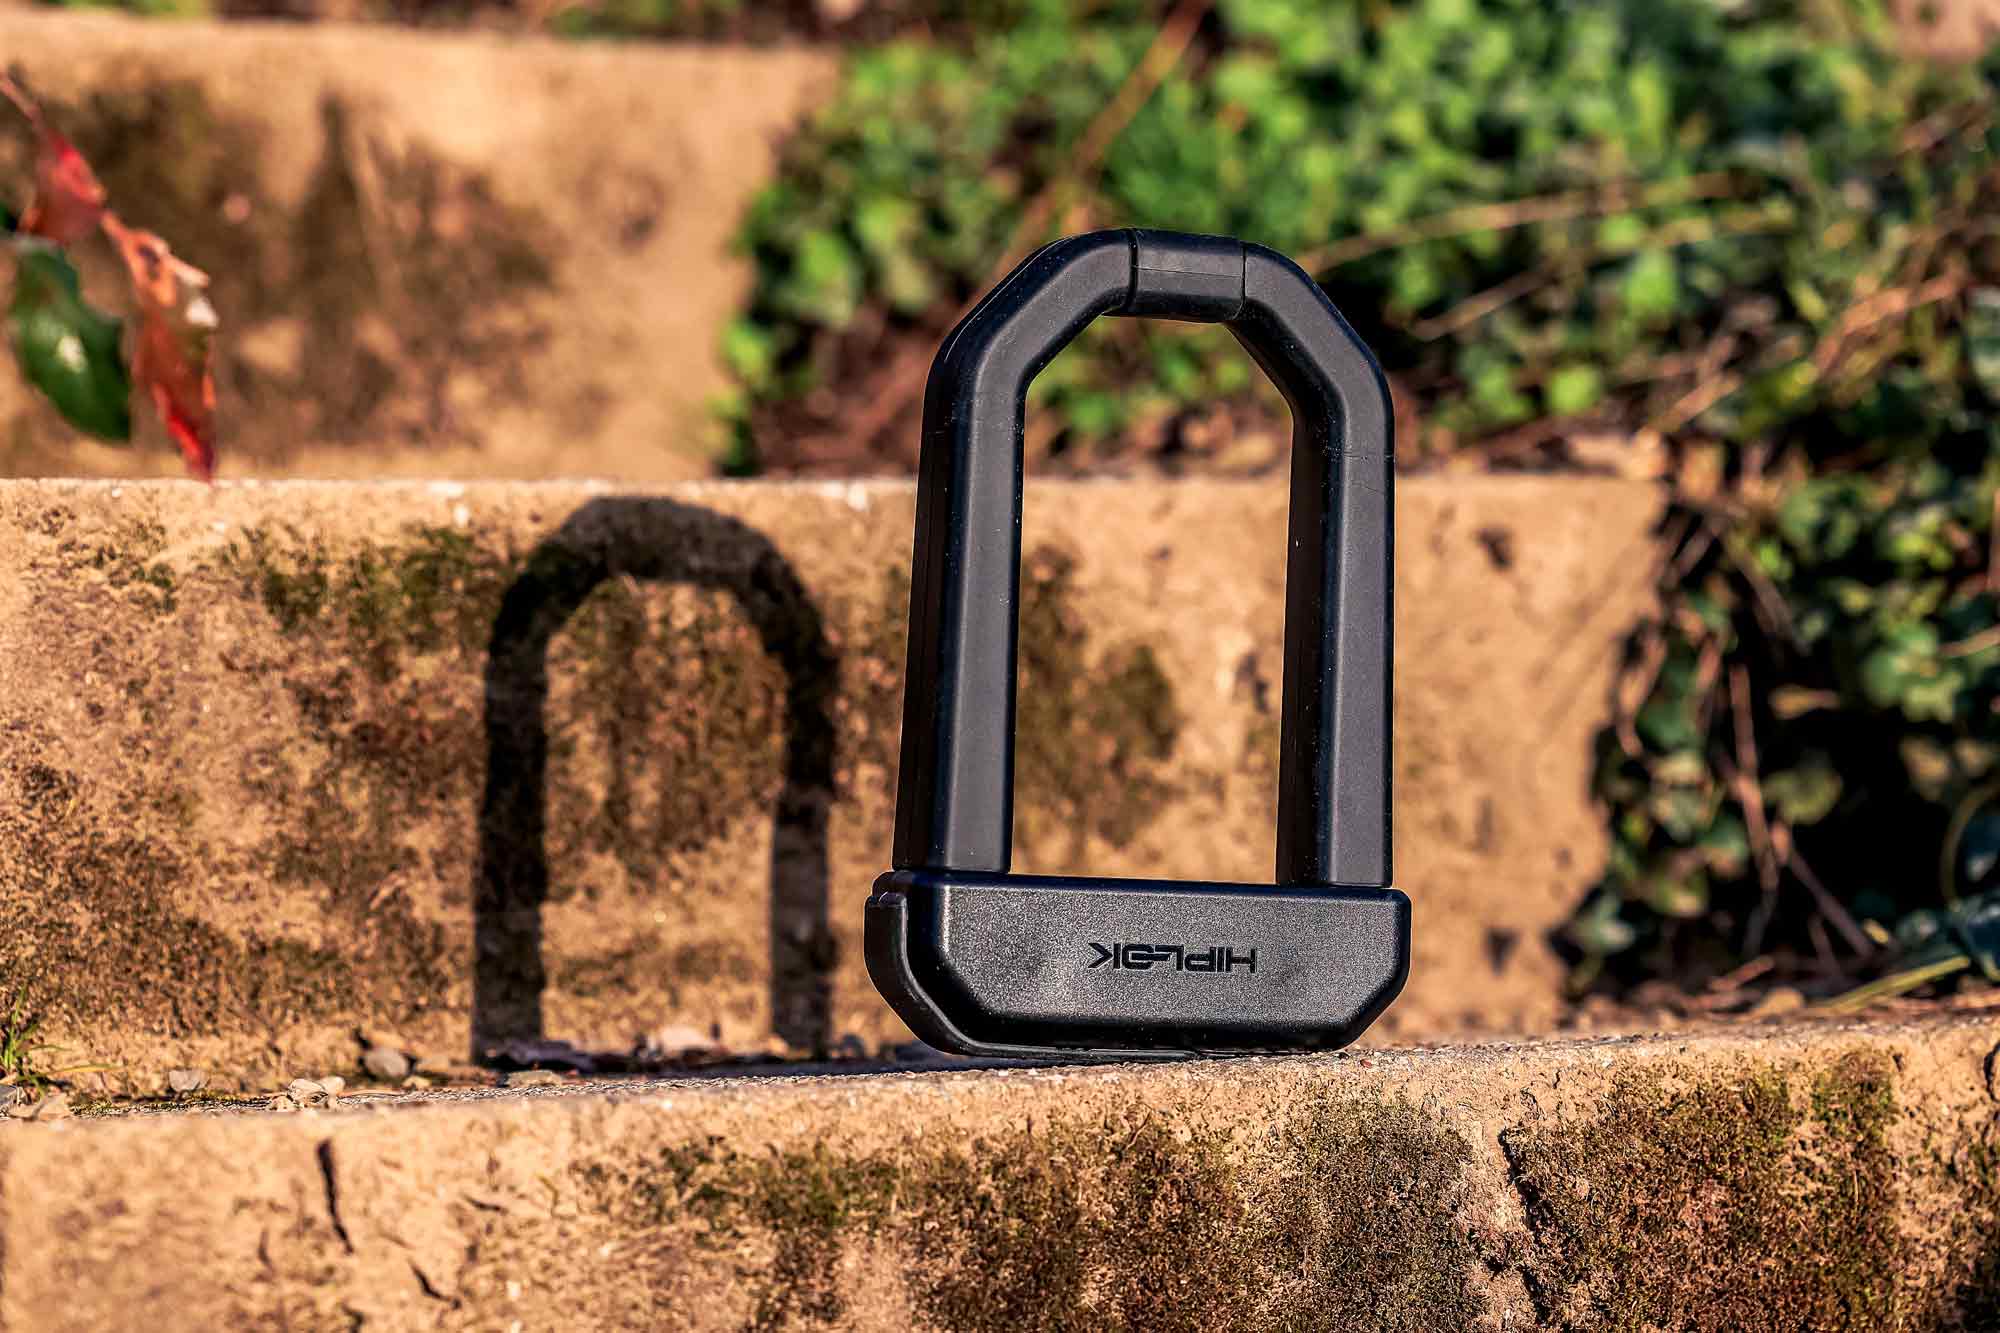 Hiplok also calls the d1000 the "anti-angle grinder lock" - that really says it all. Marked with the "solo secure diamond" seal, it's one of the most secure locks you can get for bike theft protection. With a purchase price of 279. 99 euros, however, it is also one of the most expensive...